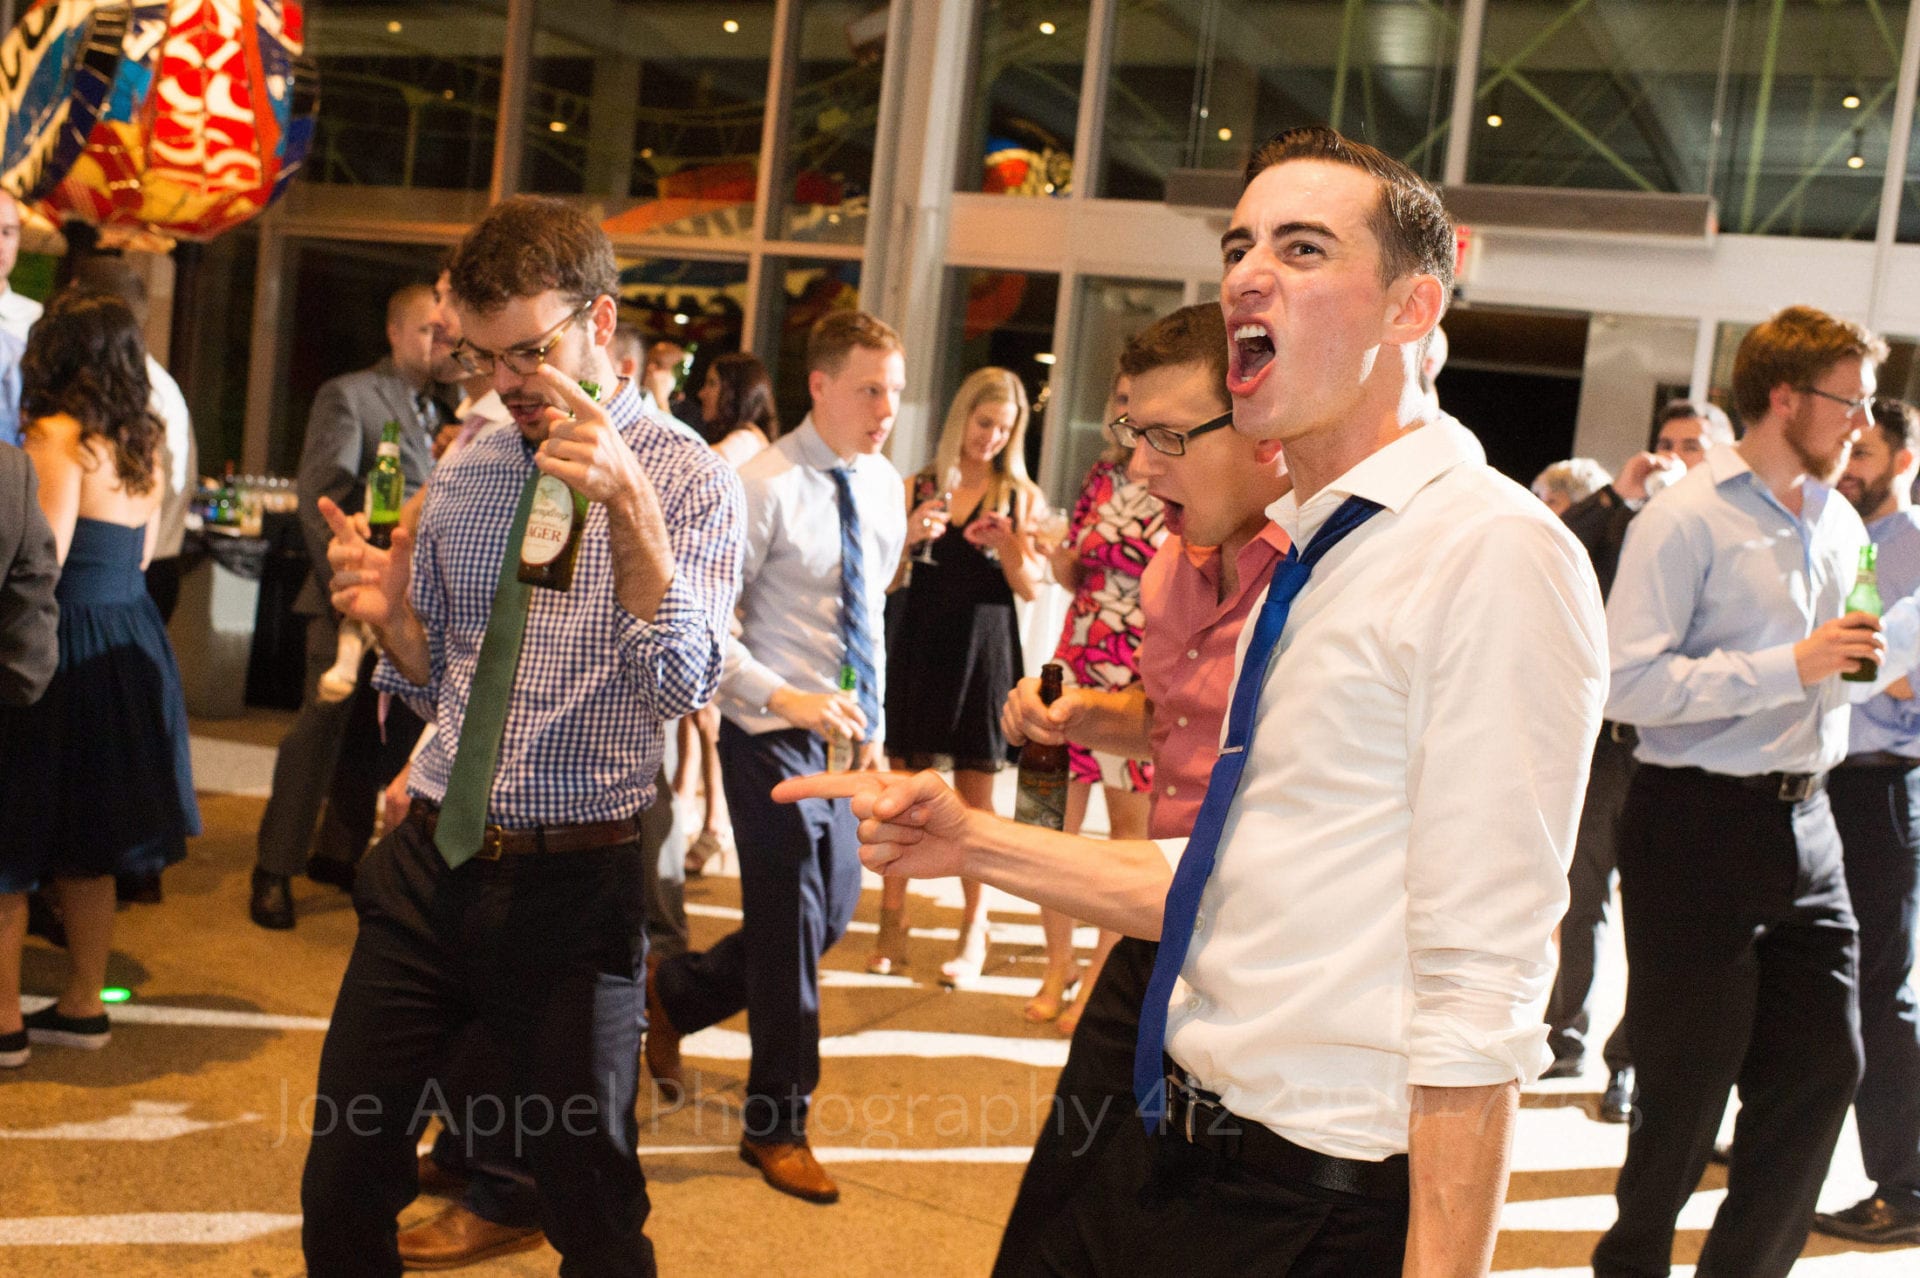 Men in shirts and ties dance during a wedding reception.